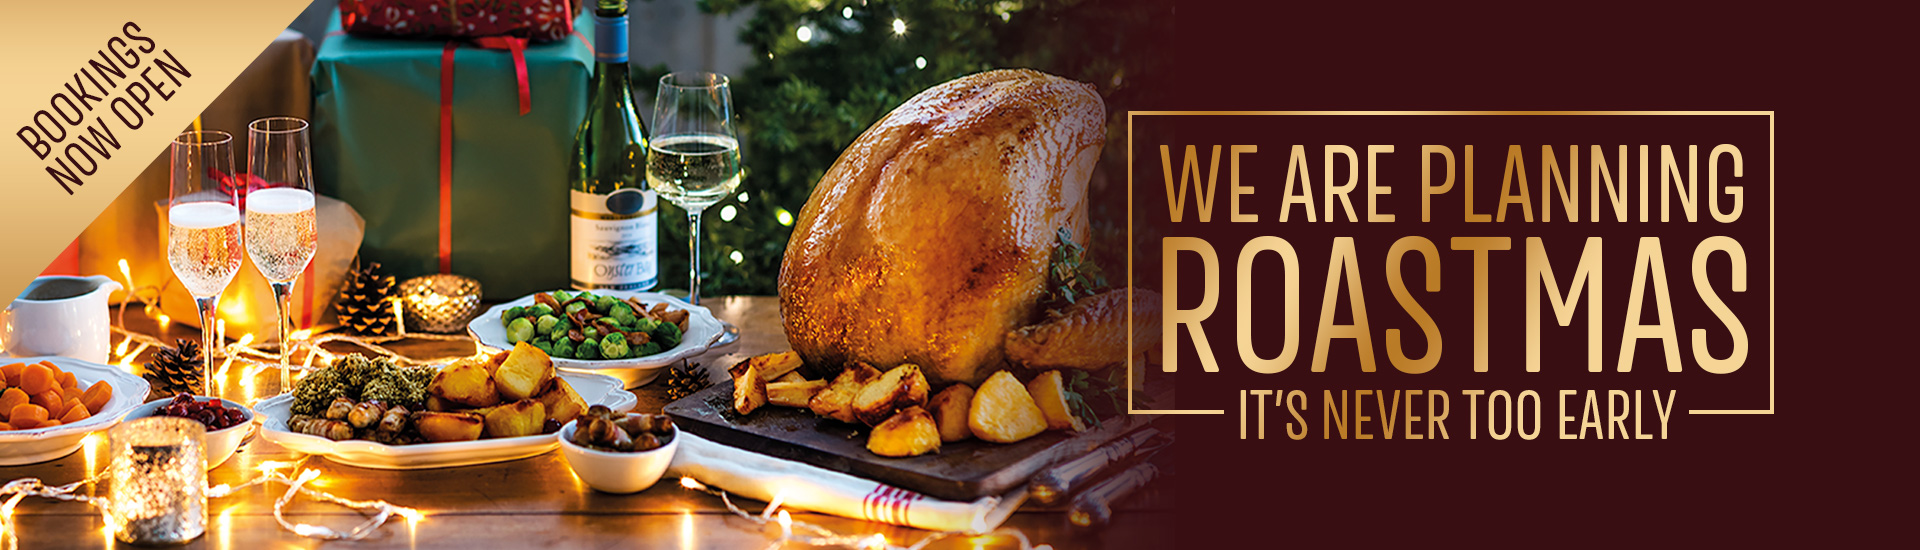 Christmas 2022 at your local Toby Carvery Keighley | Home of the Roast